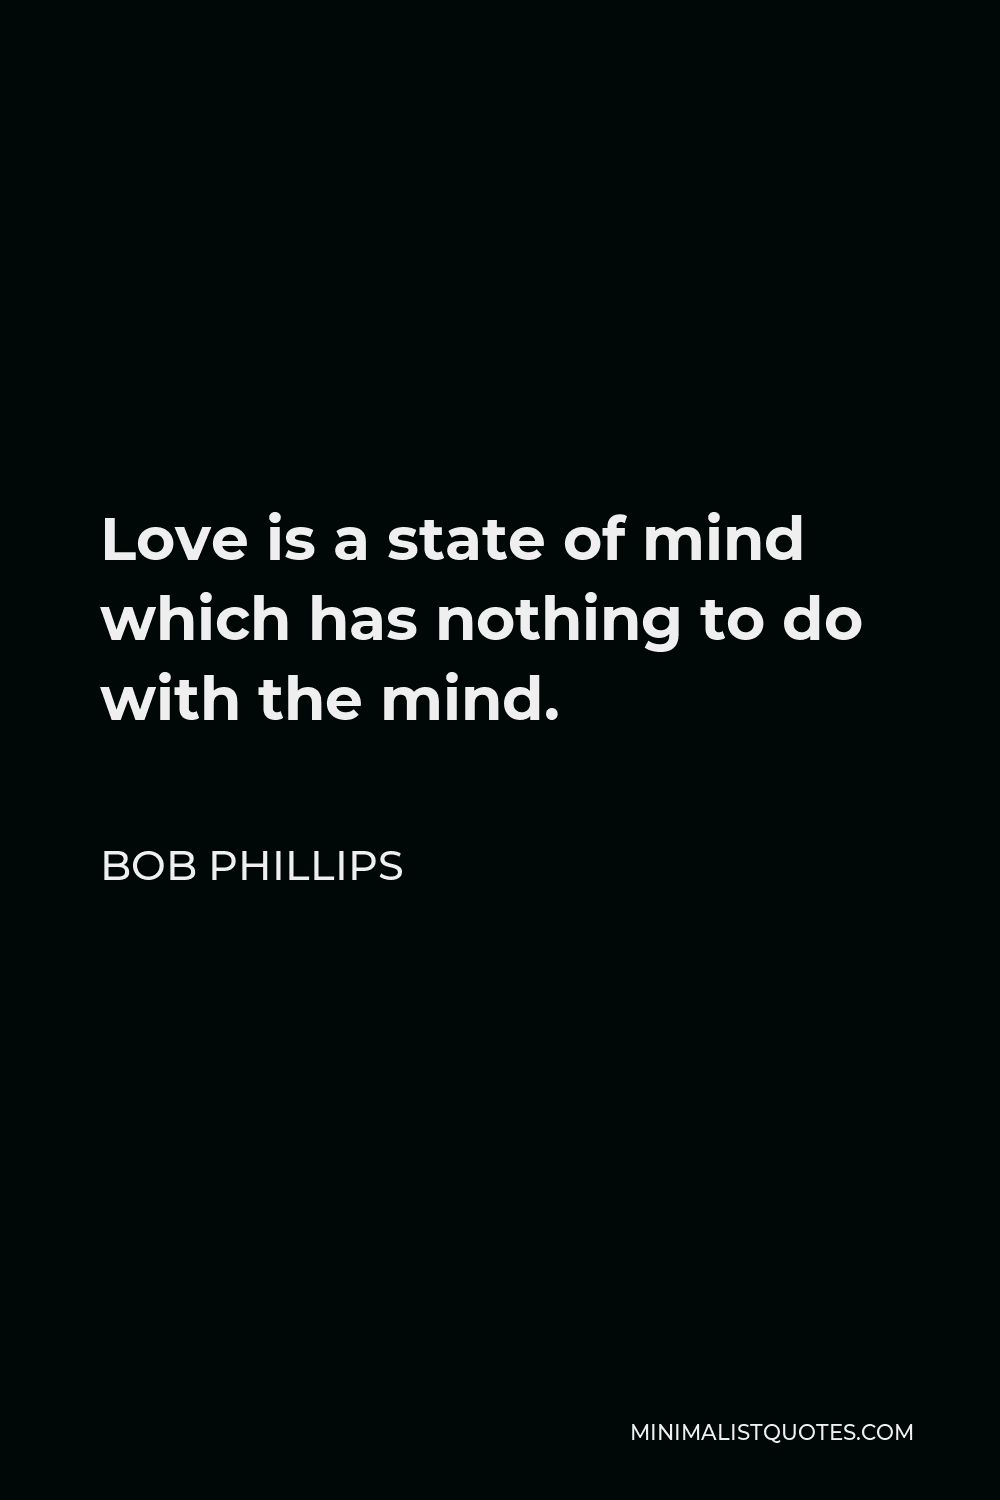 Bob Phillips Quote - Love is a state of mind which has nothing to do with the mind.